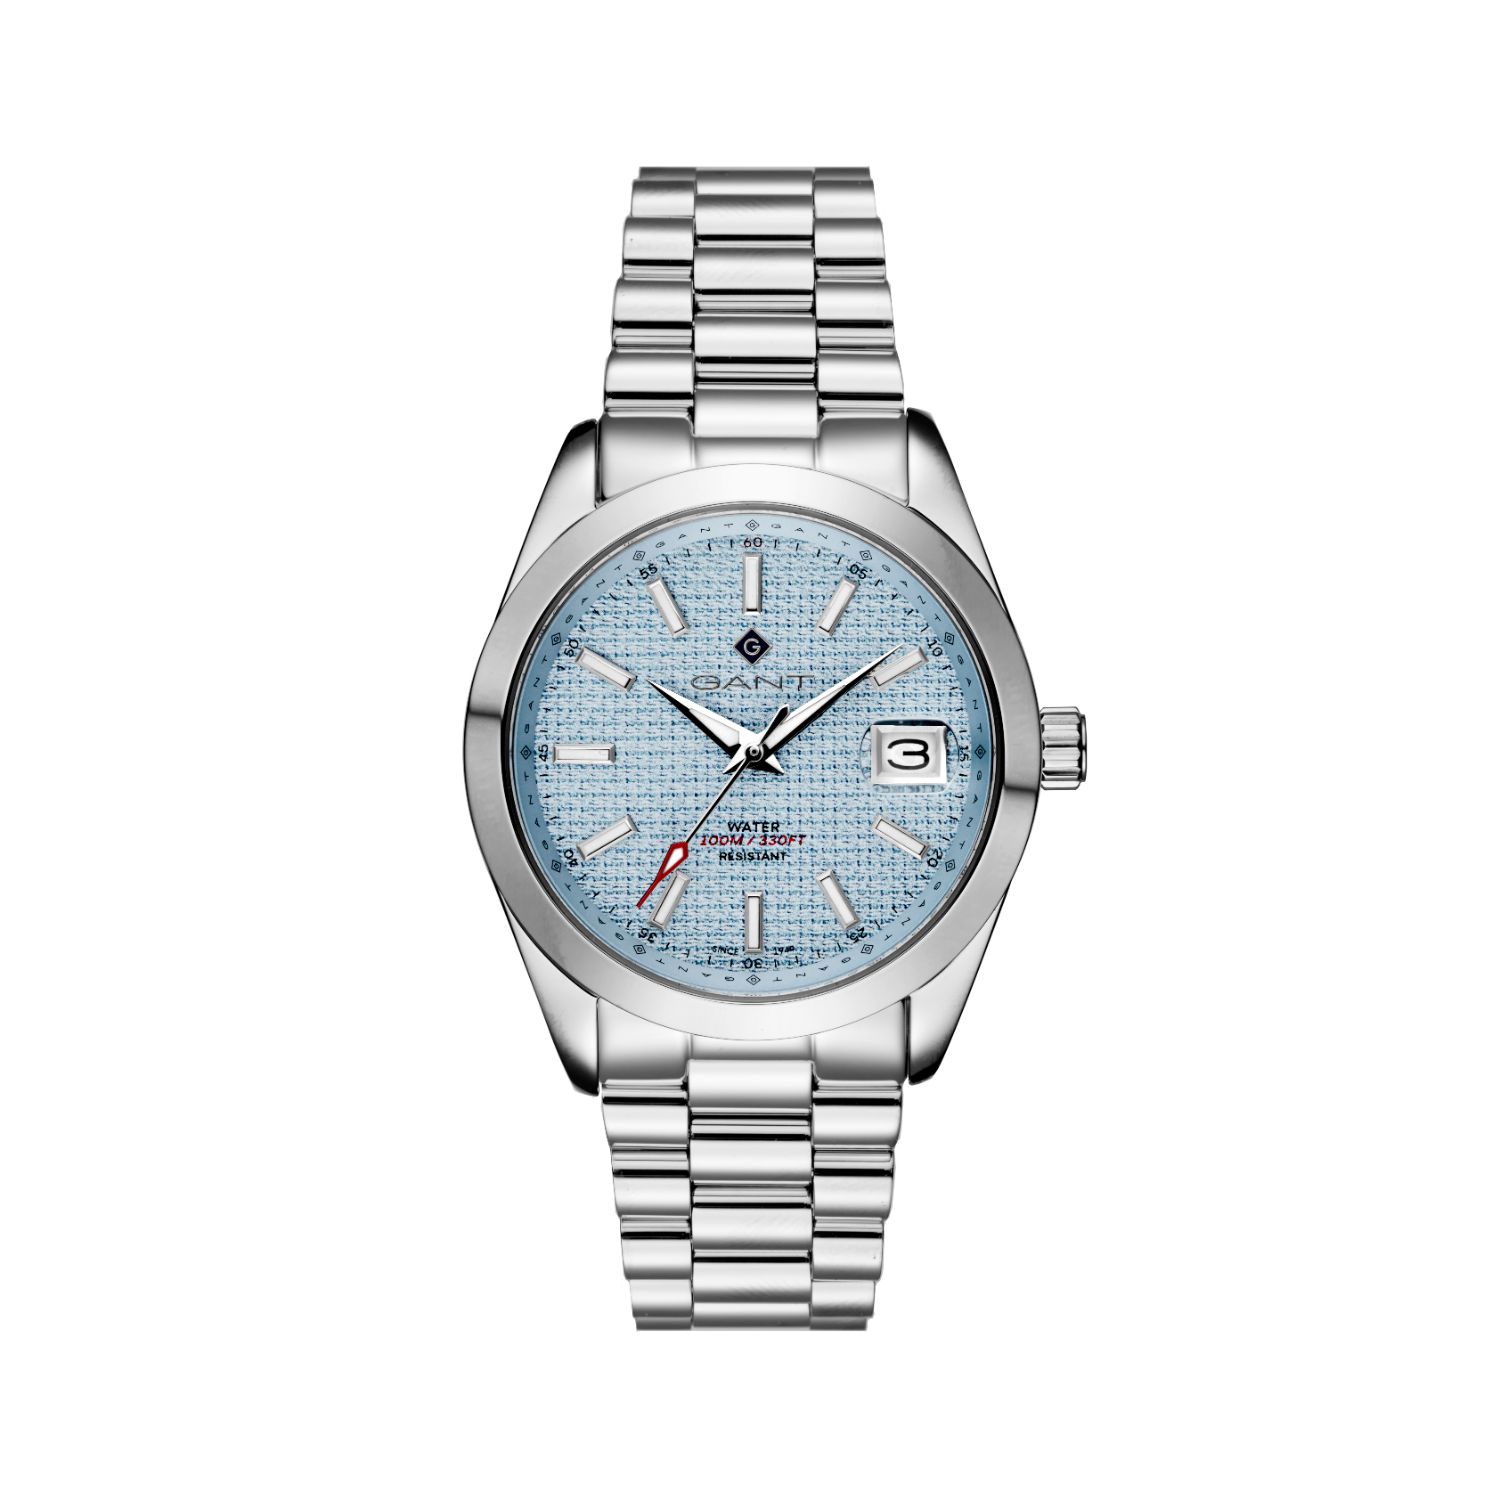 Gant Eastham Watch with Metallic Bracelet in Silver color G163002.